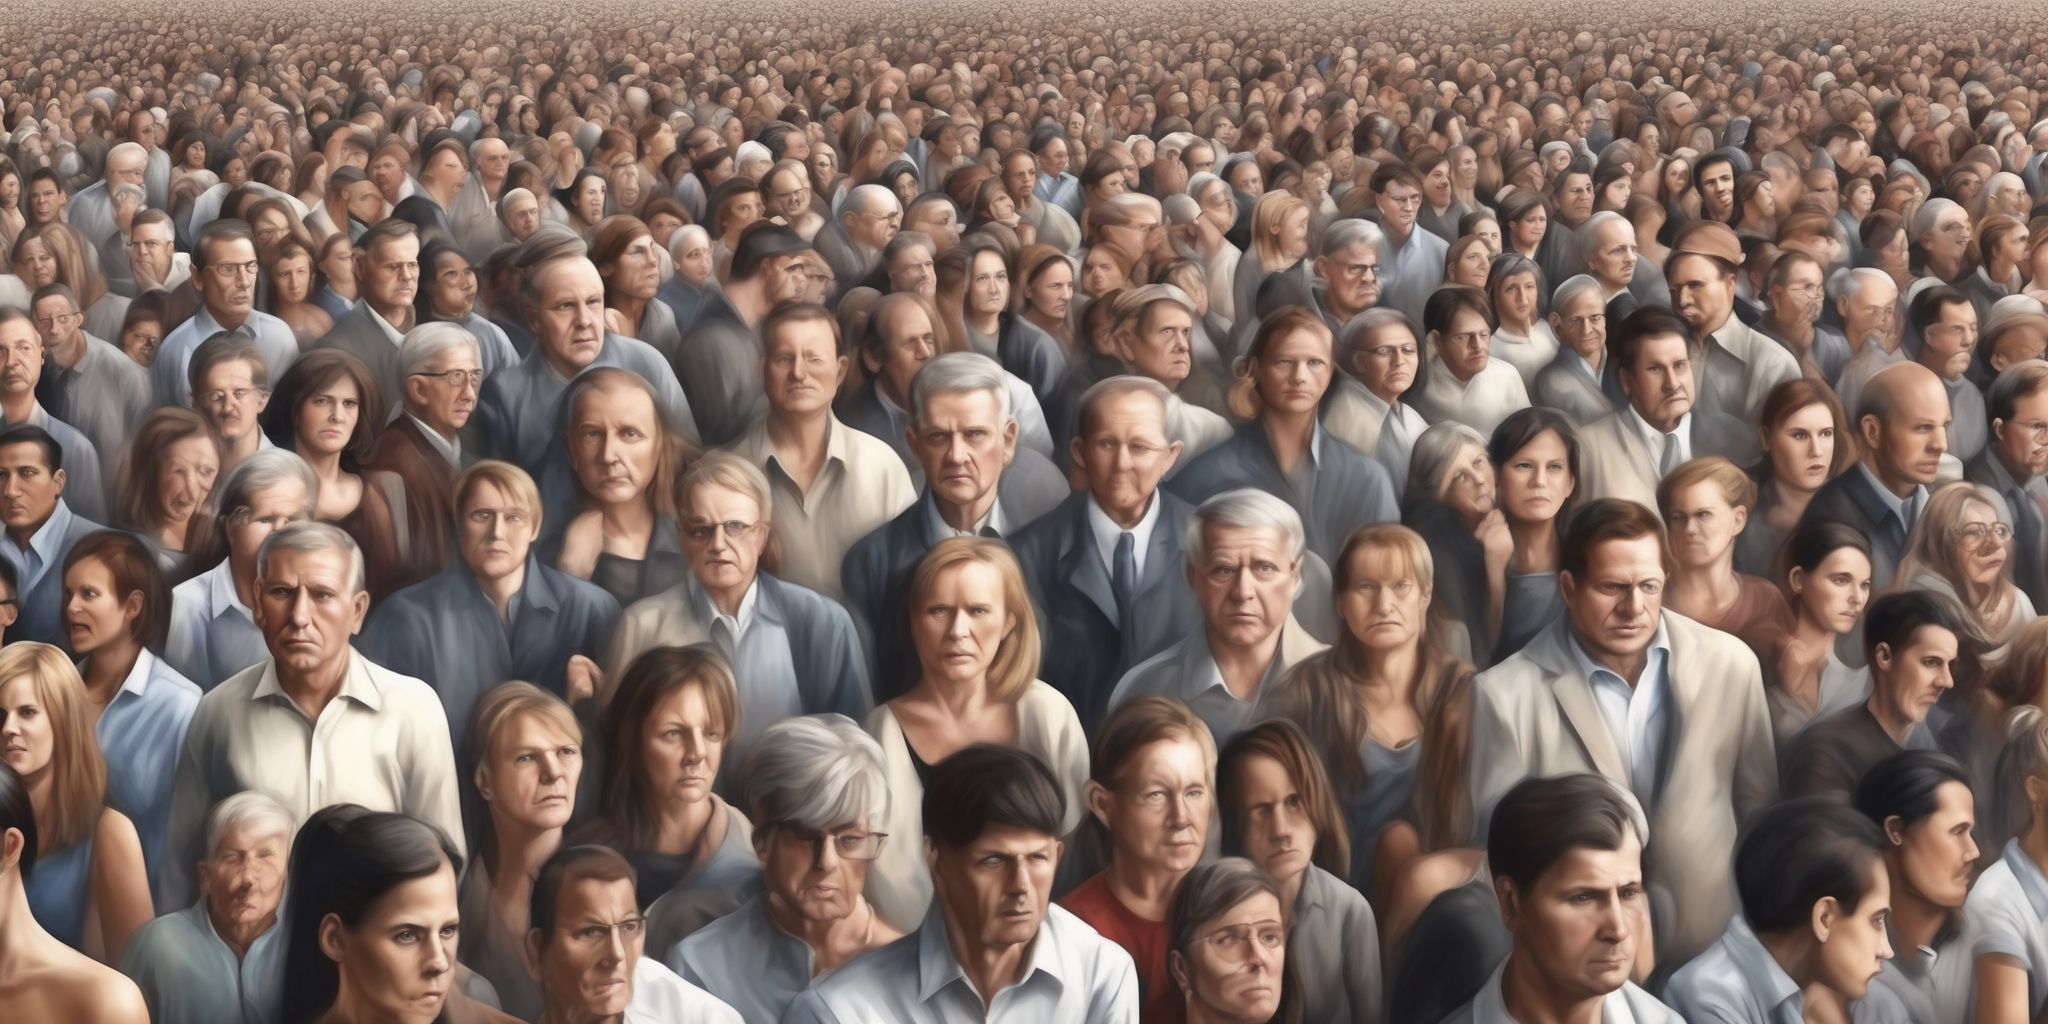 Crowd  in realistic, photographic style